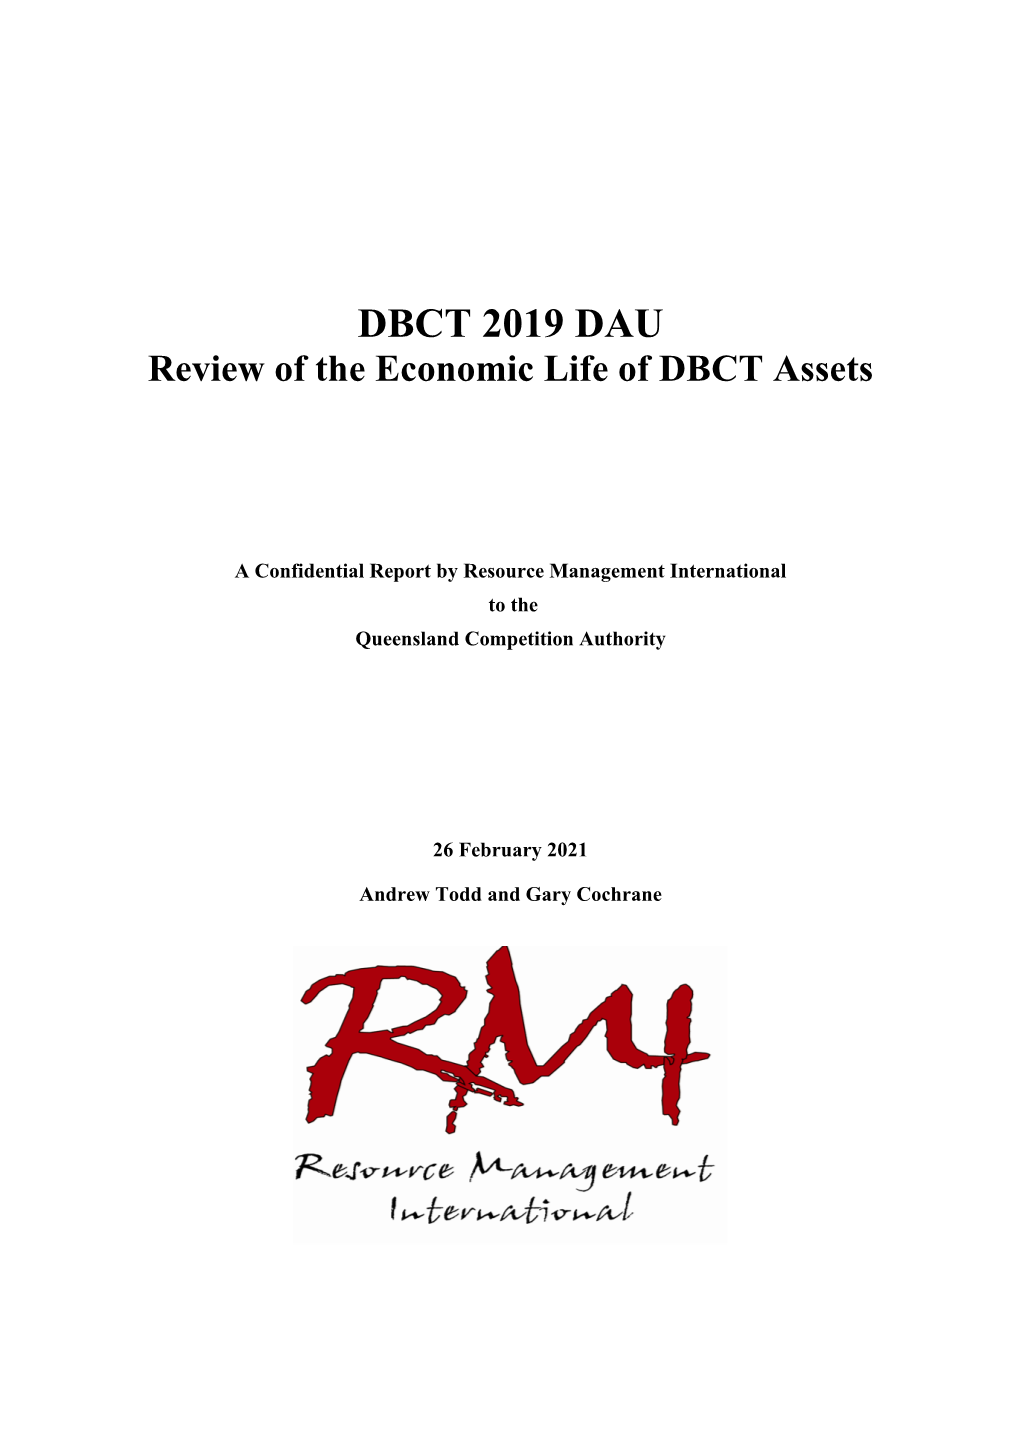 DBCT 2019 DAU Review of the Economic Life of DBCT Assets